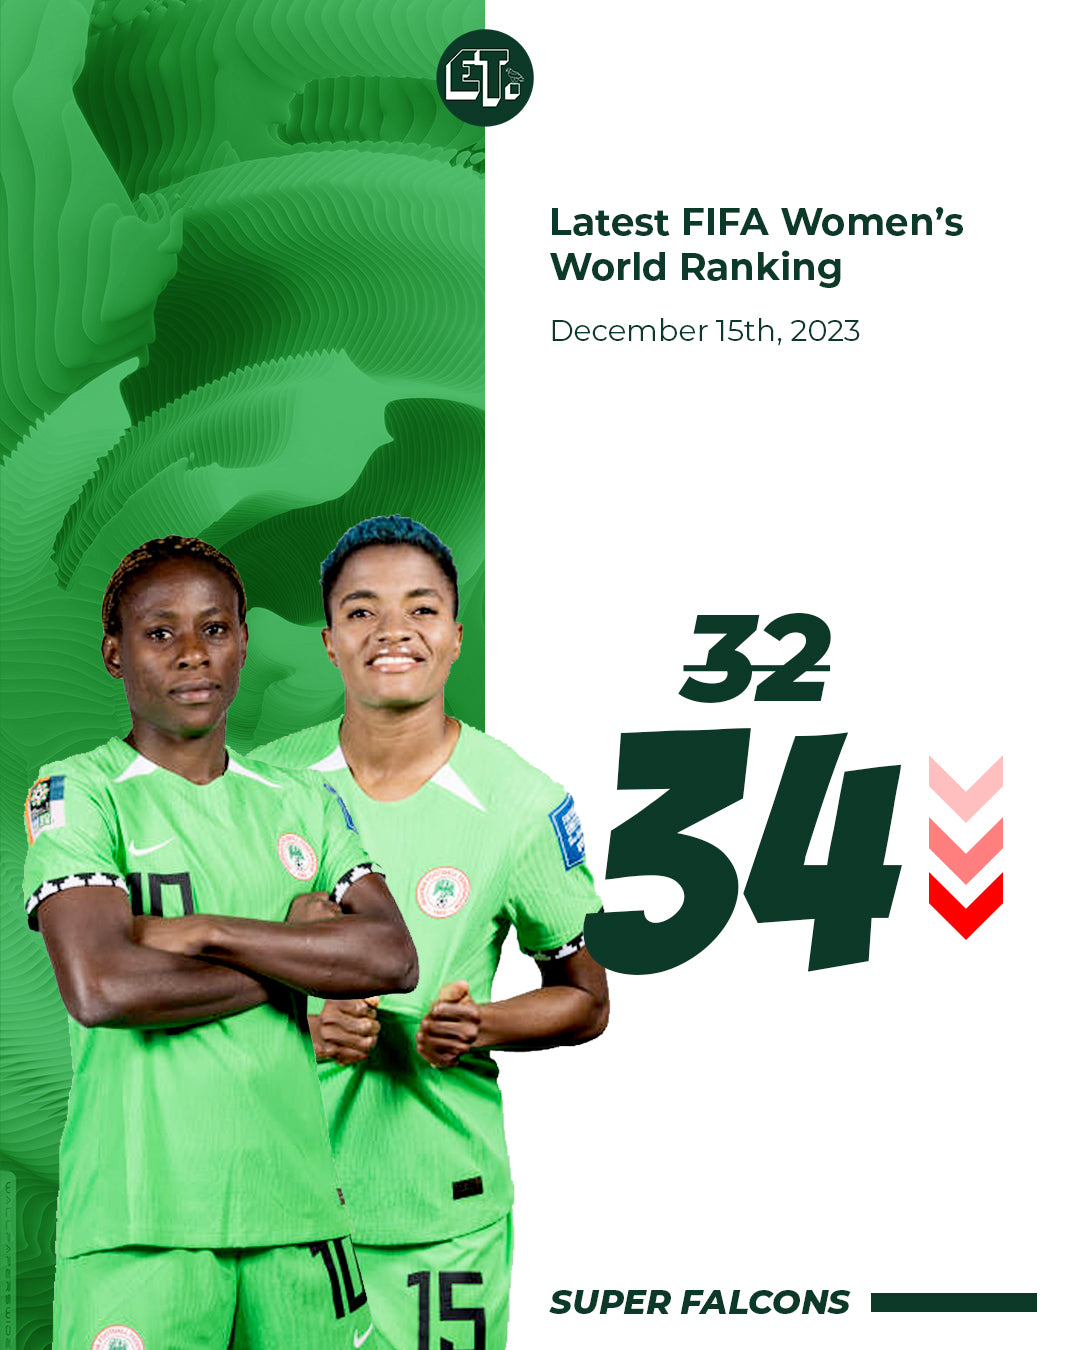 Super Falcons remain Africa's best in final FIFA rankings for 2023